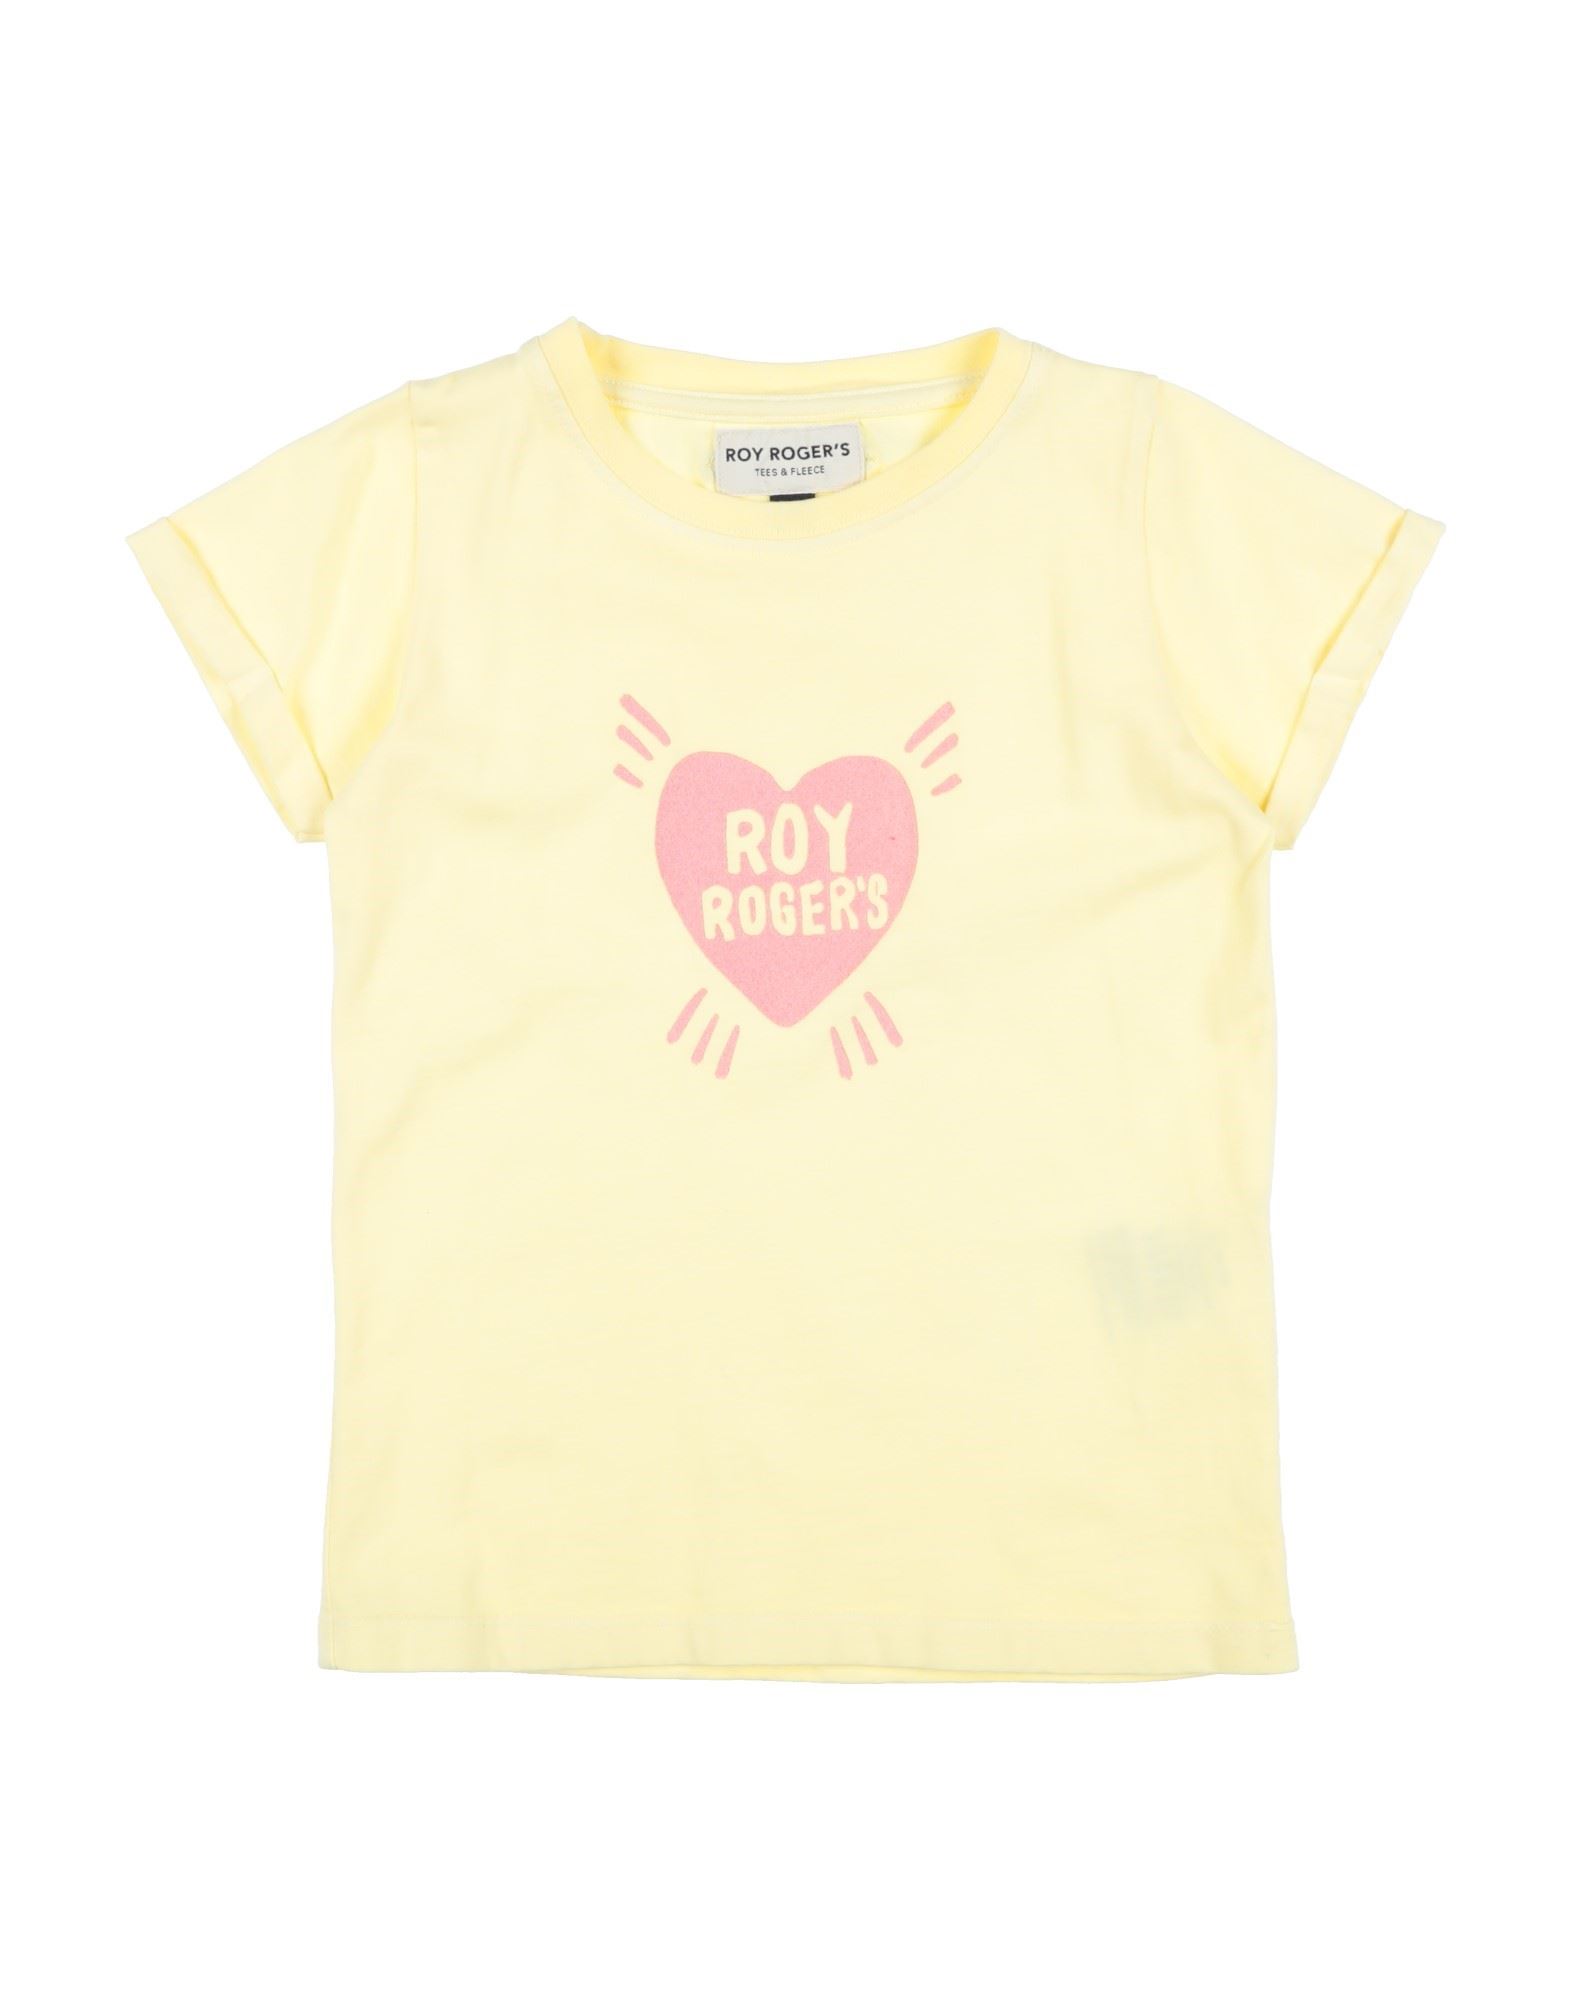 Roy Rogers Kids' Roÿ Roger's Toddler Girl T-shirt Yellow Size 6 Cotton